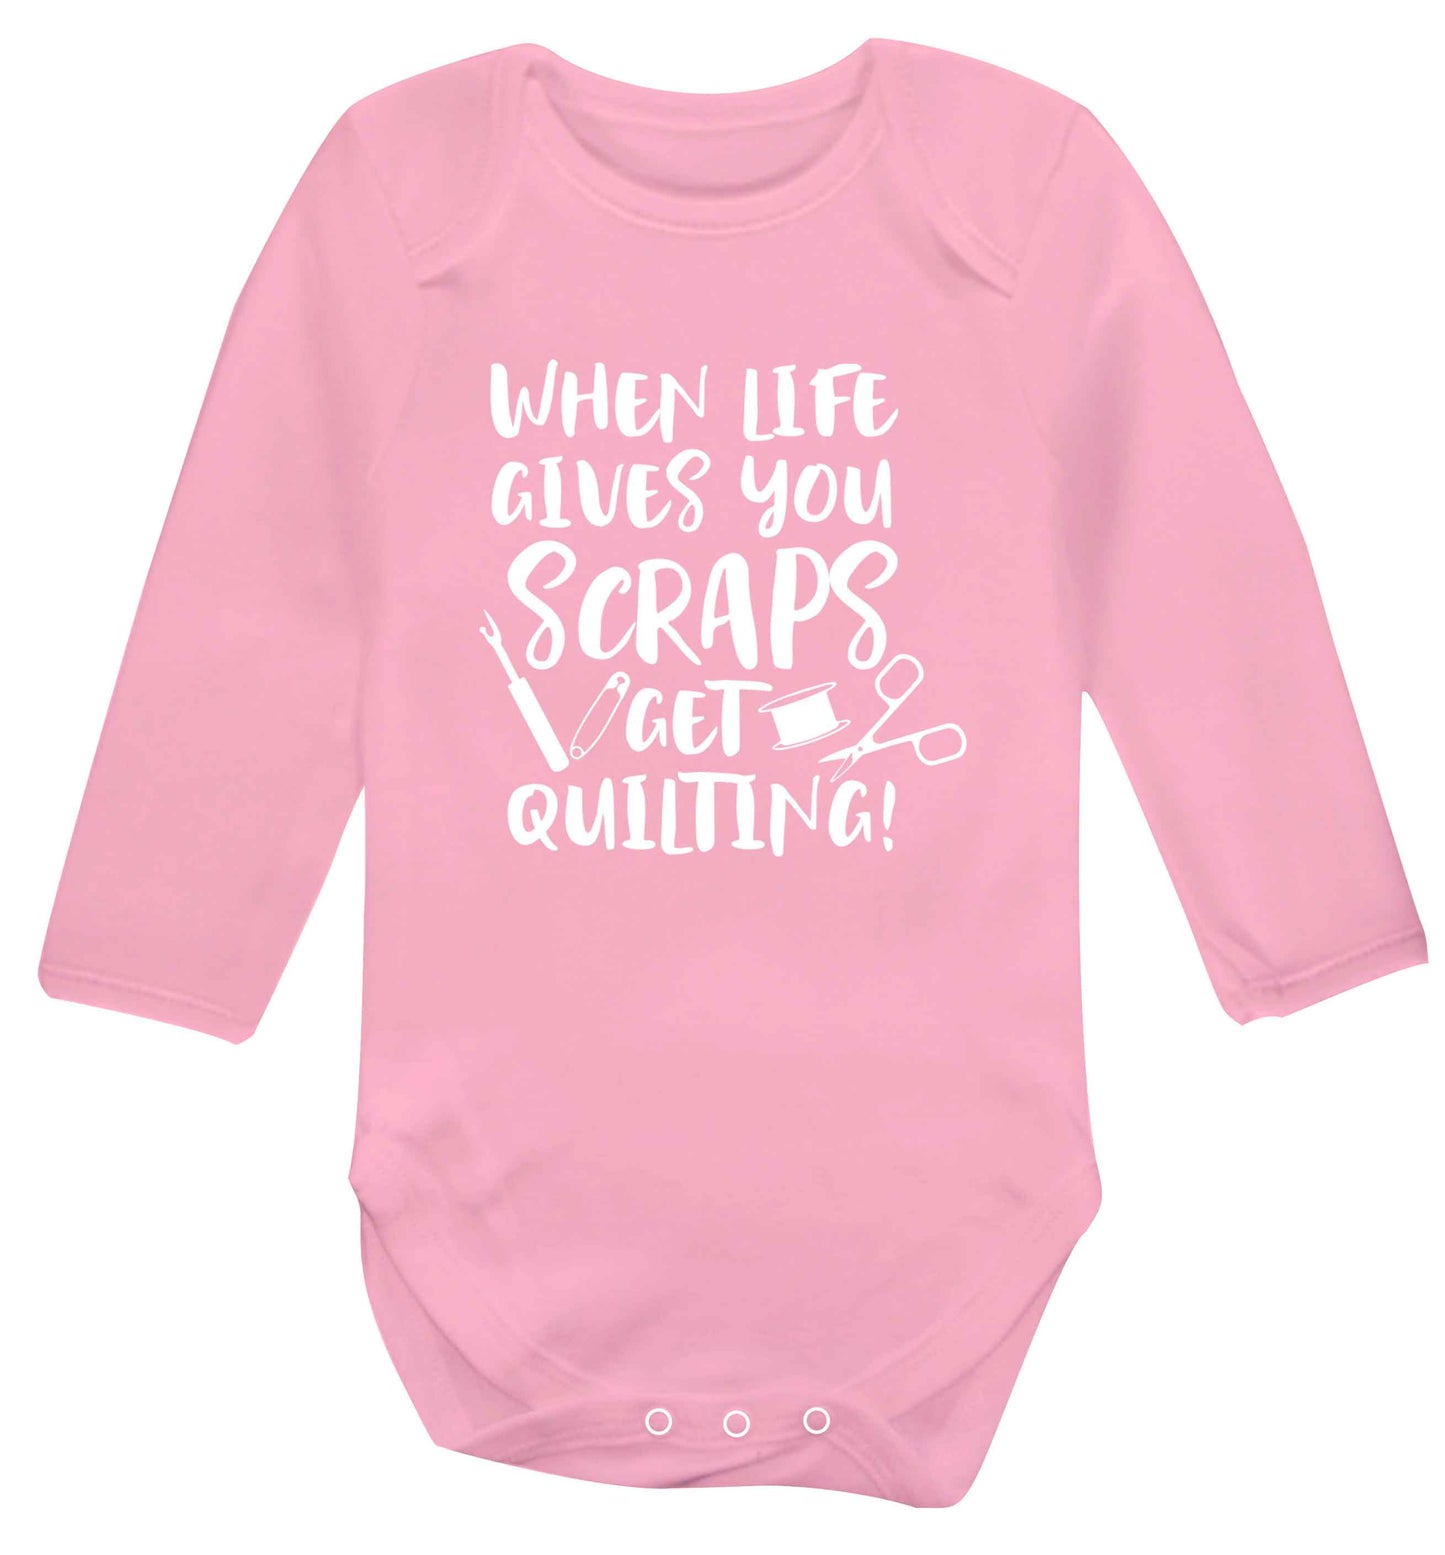 When life gives you scraps get quilting! Baby Vest long sleeved pale pink 6-12 months